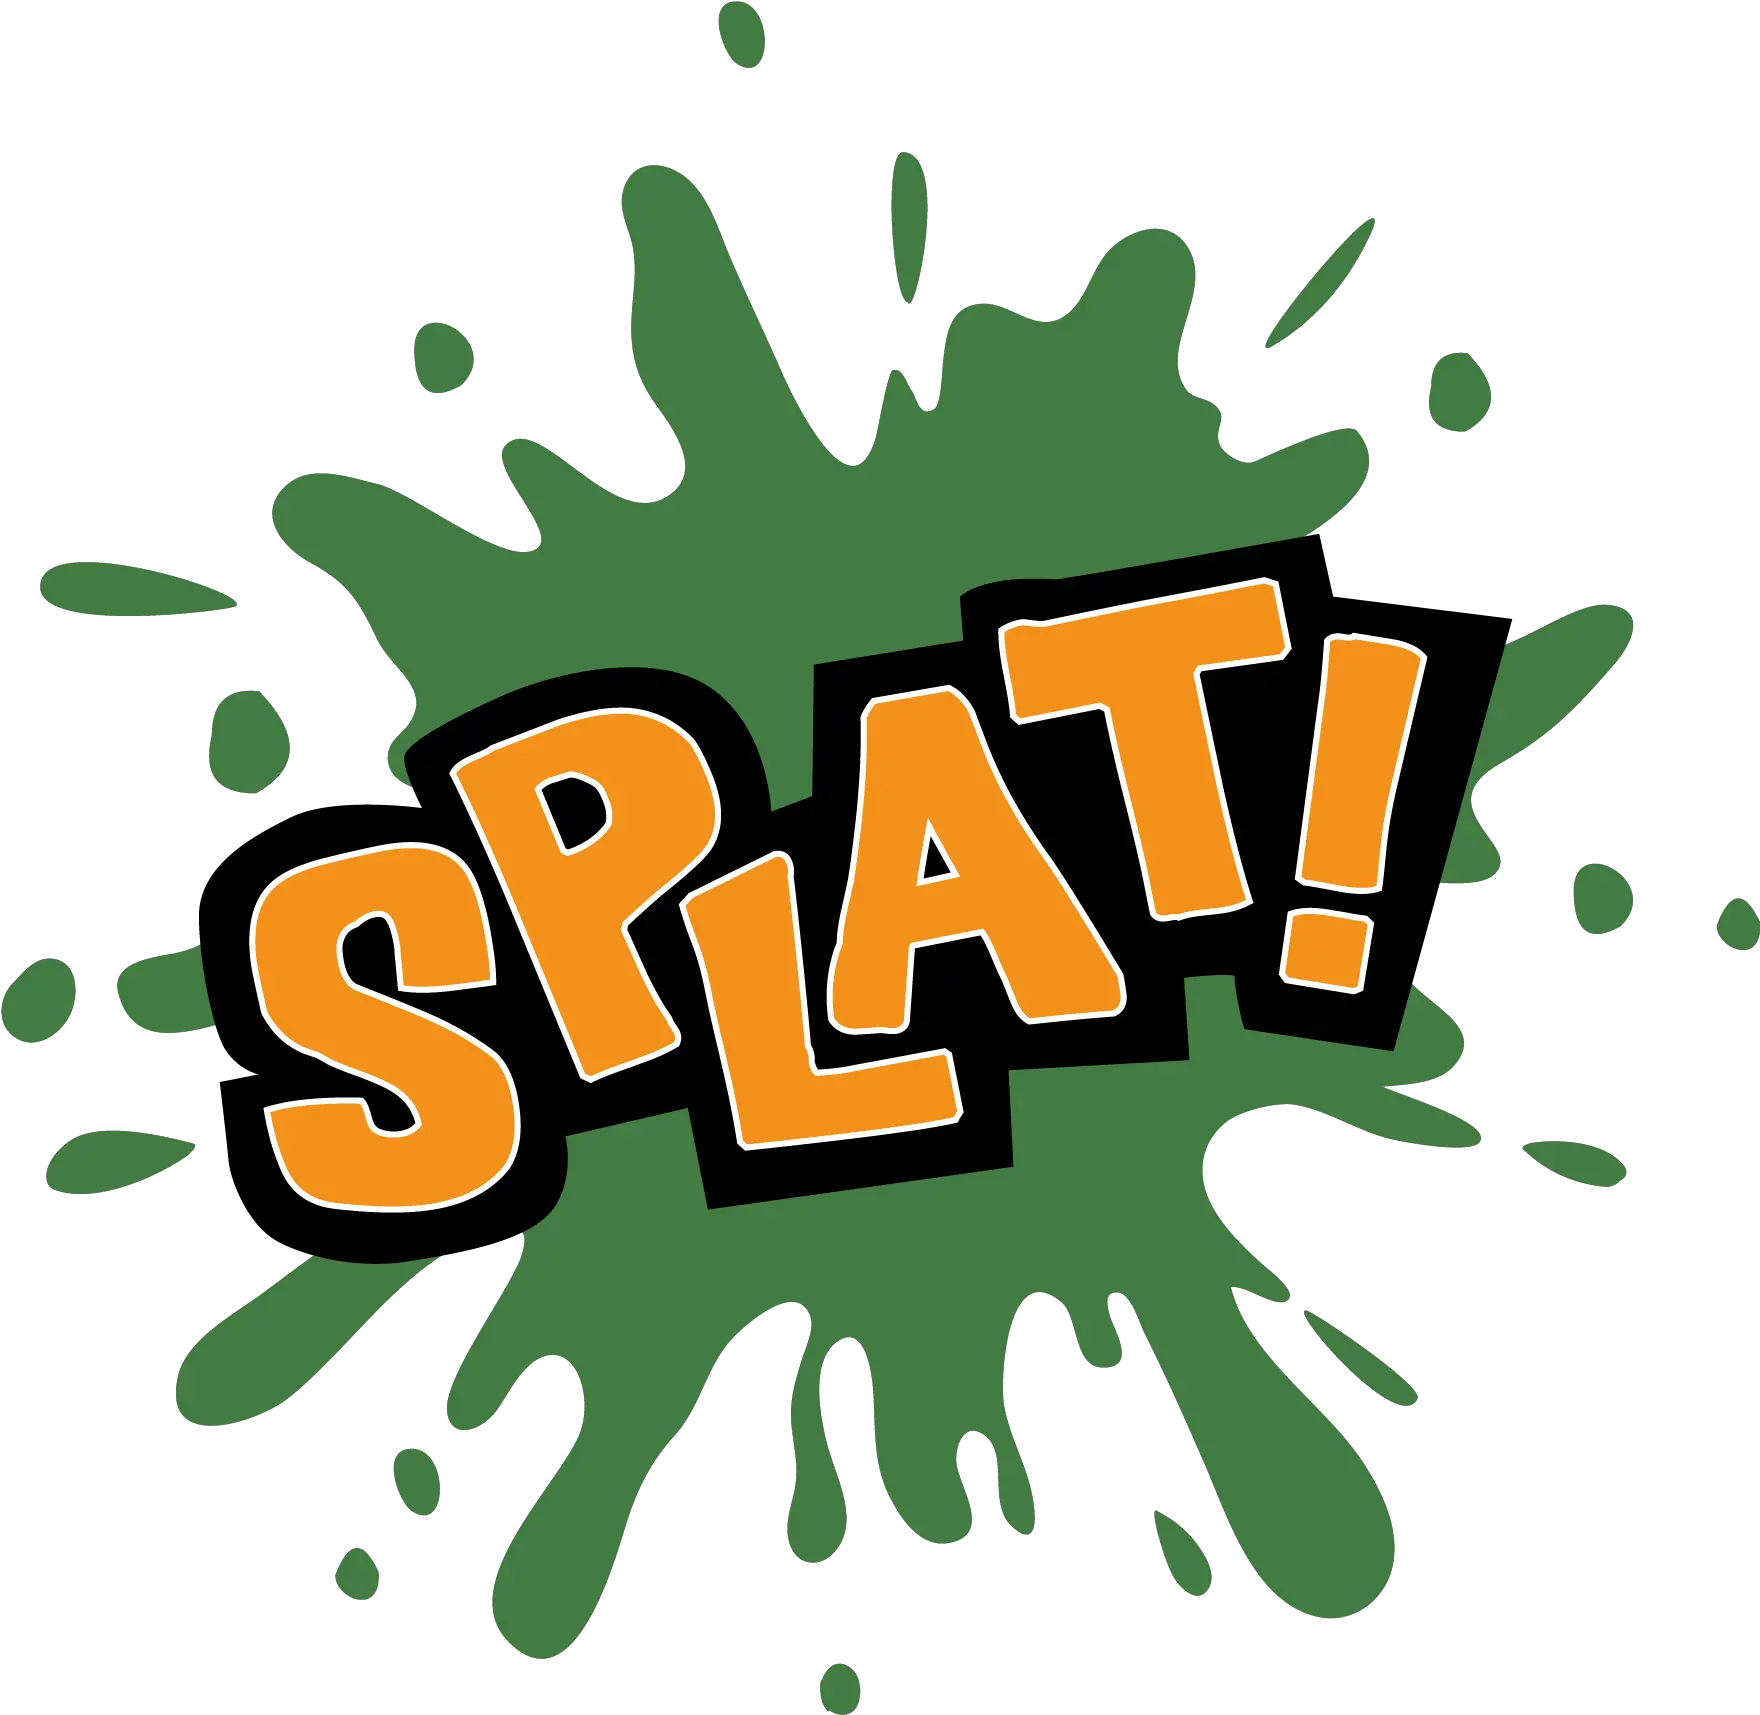 Download Subscribe Splat Png Image With No Background Illustration Splat Png